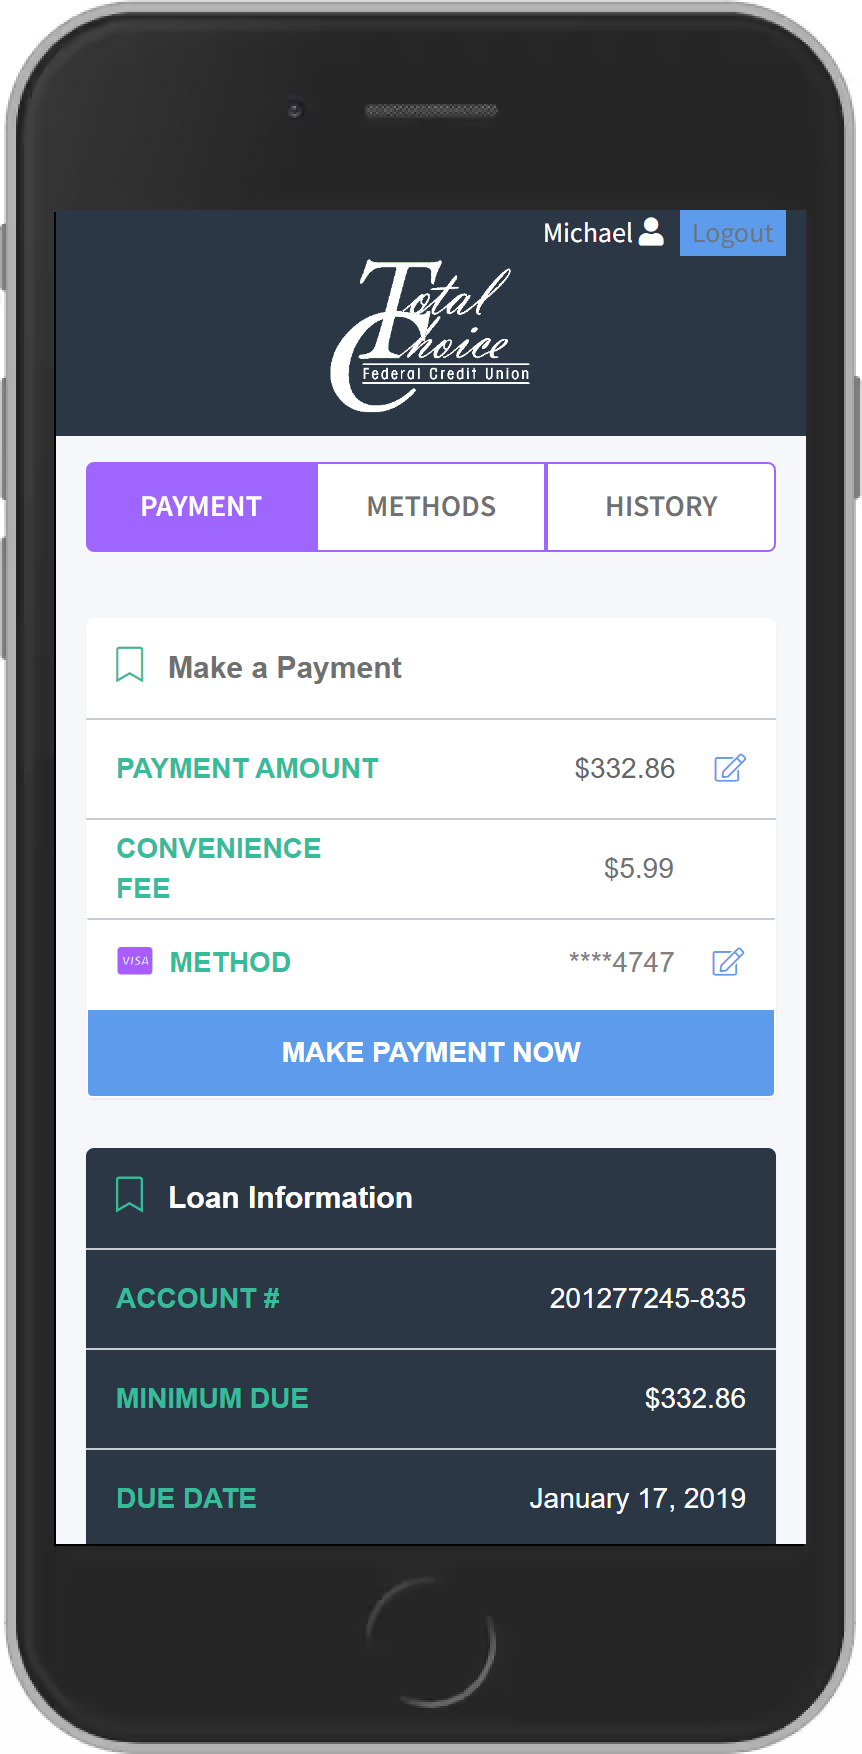 Message Pay make a payment now screen